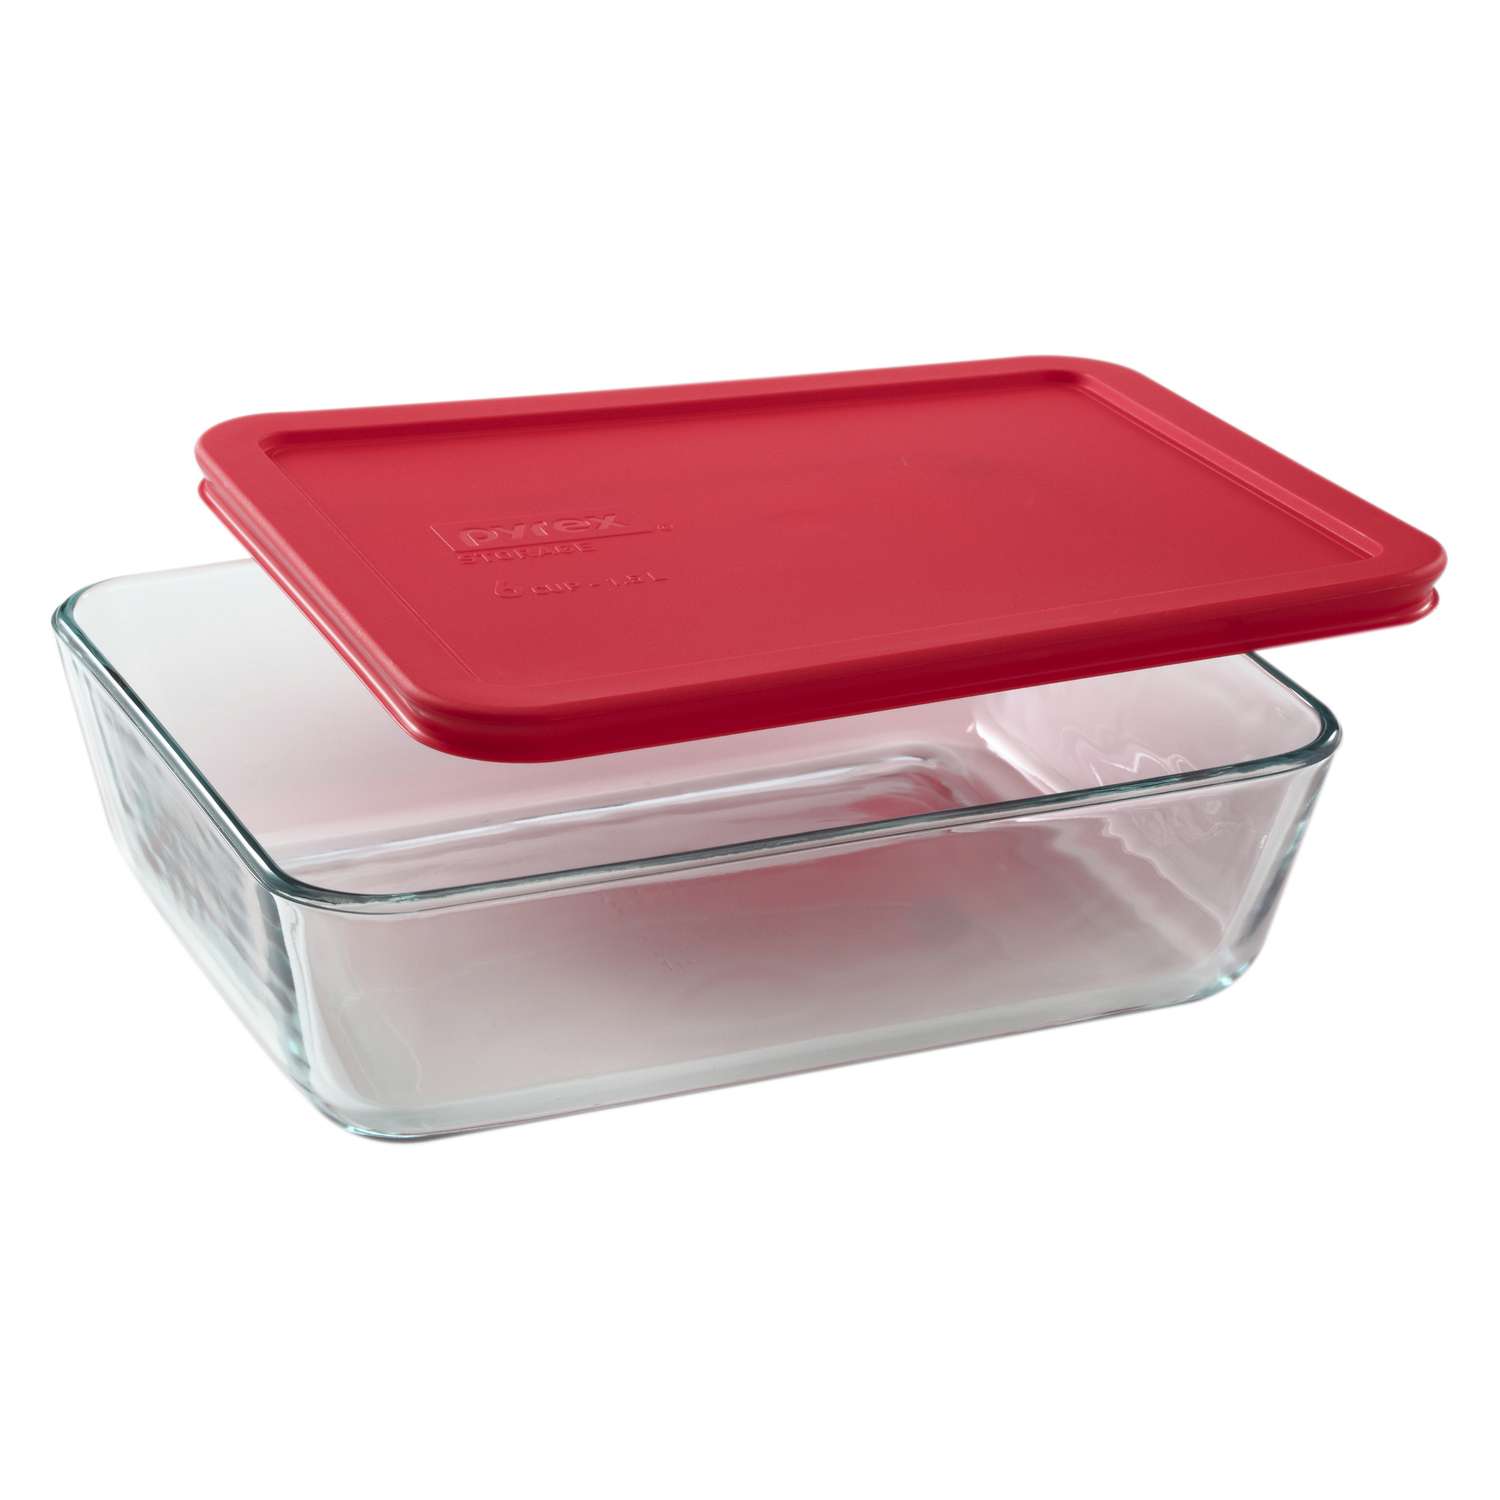 Pyrex Simply Store 6-PC Large Glass Food Storage Containers Set, Snug Fit  Non-Toxic Plastic BPA-Free Lids, Freezer Dishwasher Microwave Safe